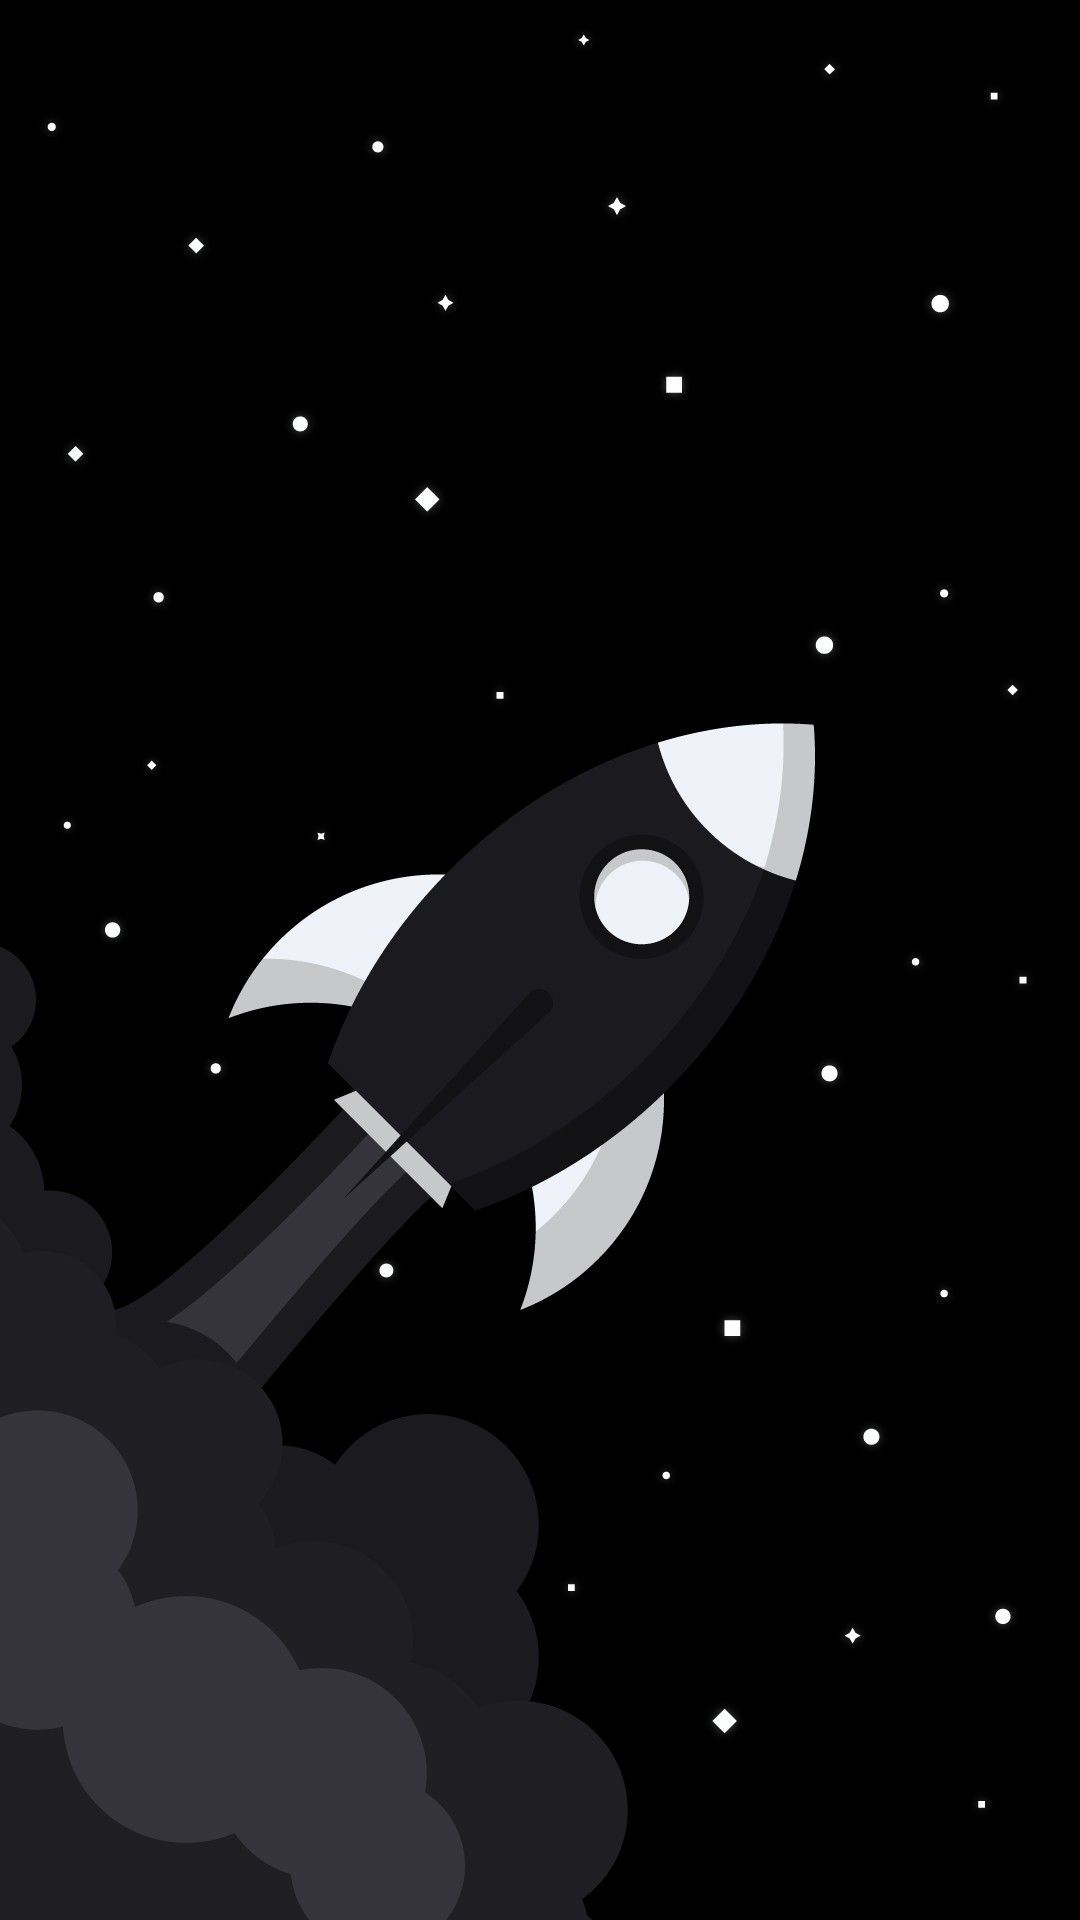 iPhone Wallpaper. Cartoon, Outer space, Illustration, Space, Sky